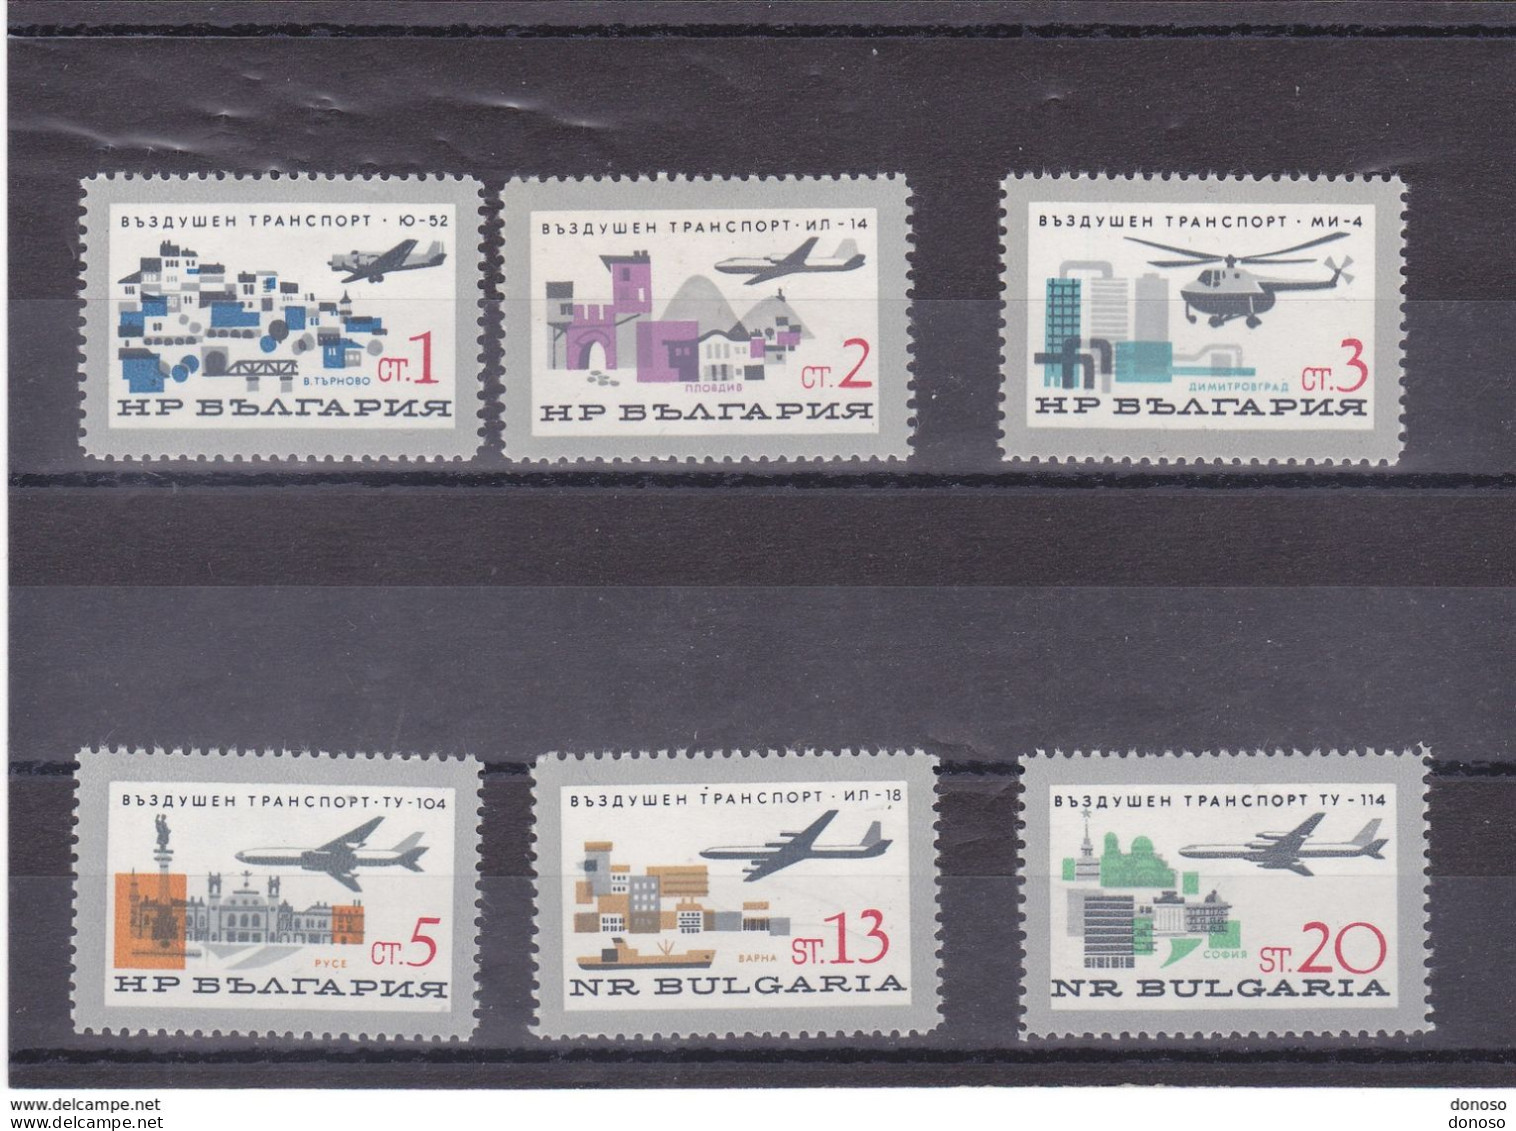 BULGARIE 1965 Avions, Junkers, Iliouchine, Tupolev, Hélicoptère Mig 4 Yvert  1376-1381 NEUF** MNH Cote 5,50 Euros - Unused Stamps